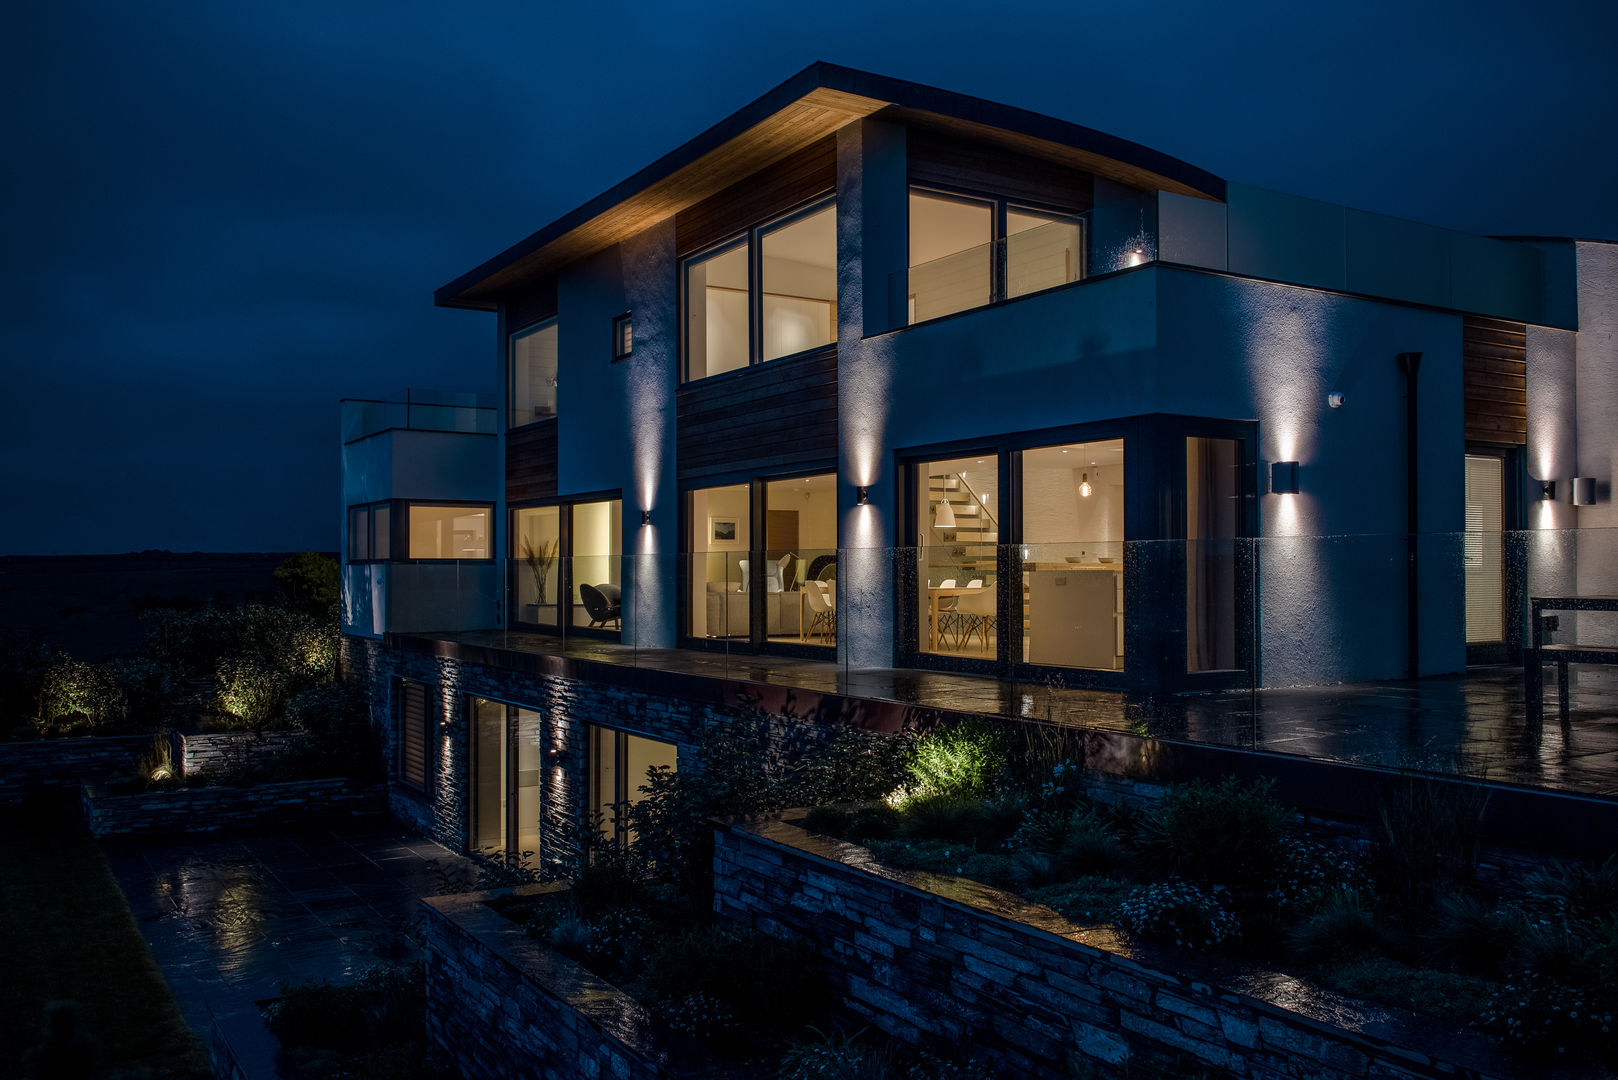 New Contemporary House, Polzeath, Cornwall Arco2 Architecture Ltd Maisons modernes Architects Cornwall, architecture Cornwall, arco2 architects, eco friendly architects, sustainable architects, sustainable architecture, architecture by the sea, beach house architecture,